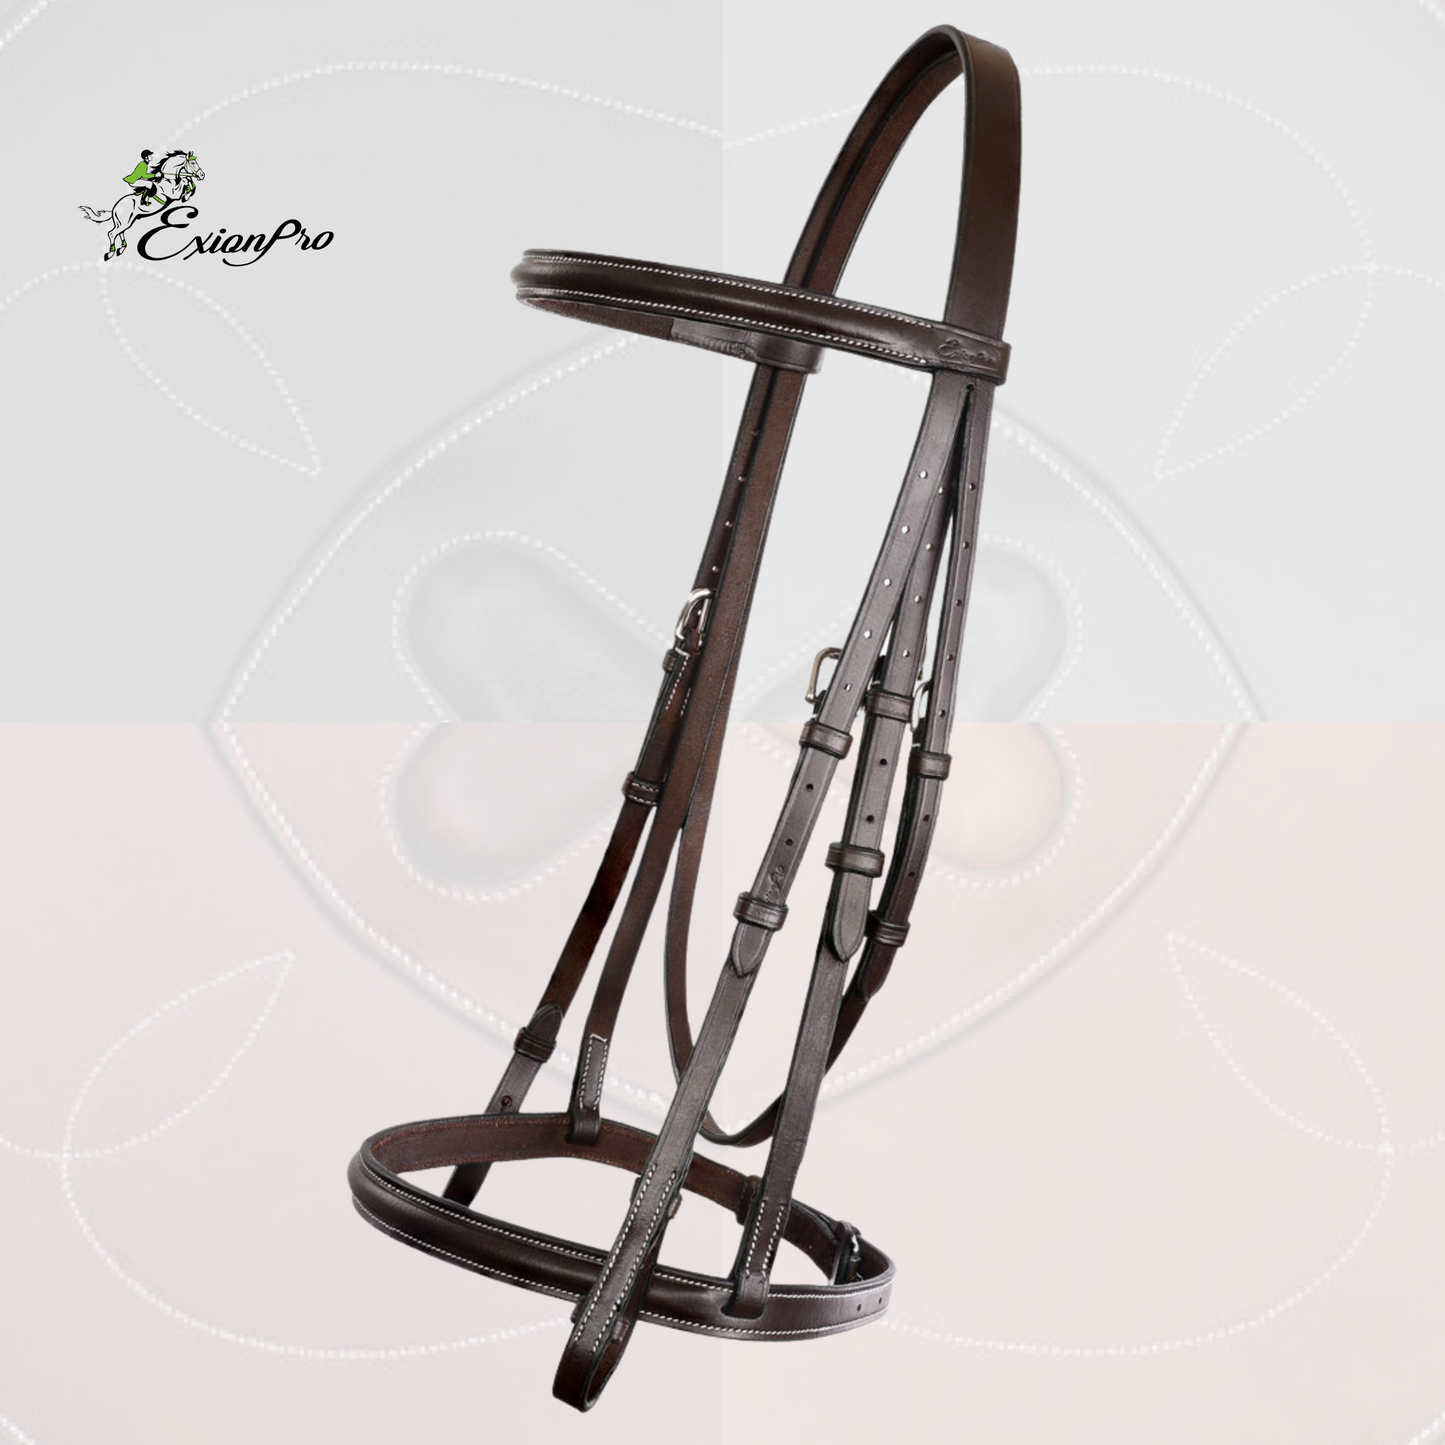 ExionPro Traditional Raised Bridle {European Leather Version} - 4 Colors Available